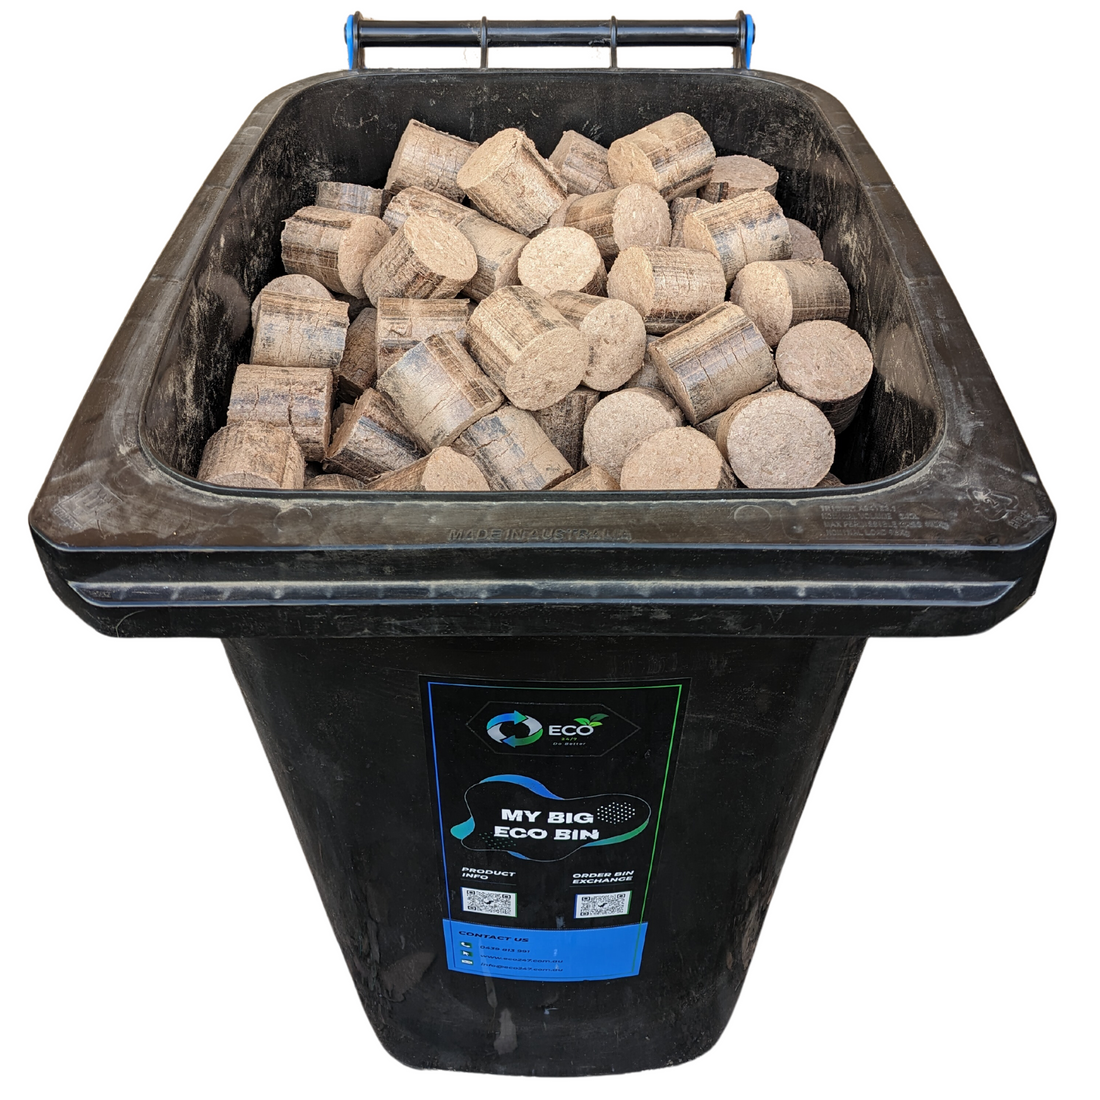 Briquettes: Your Guide to Efficient and Sustainable Home Heating